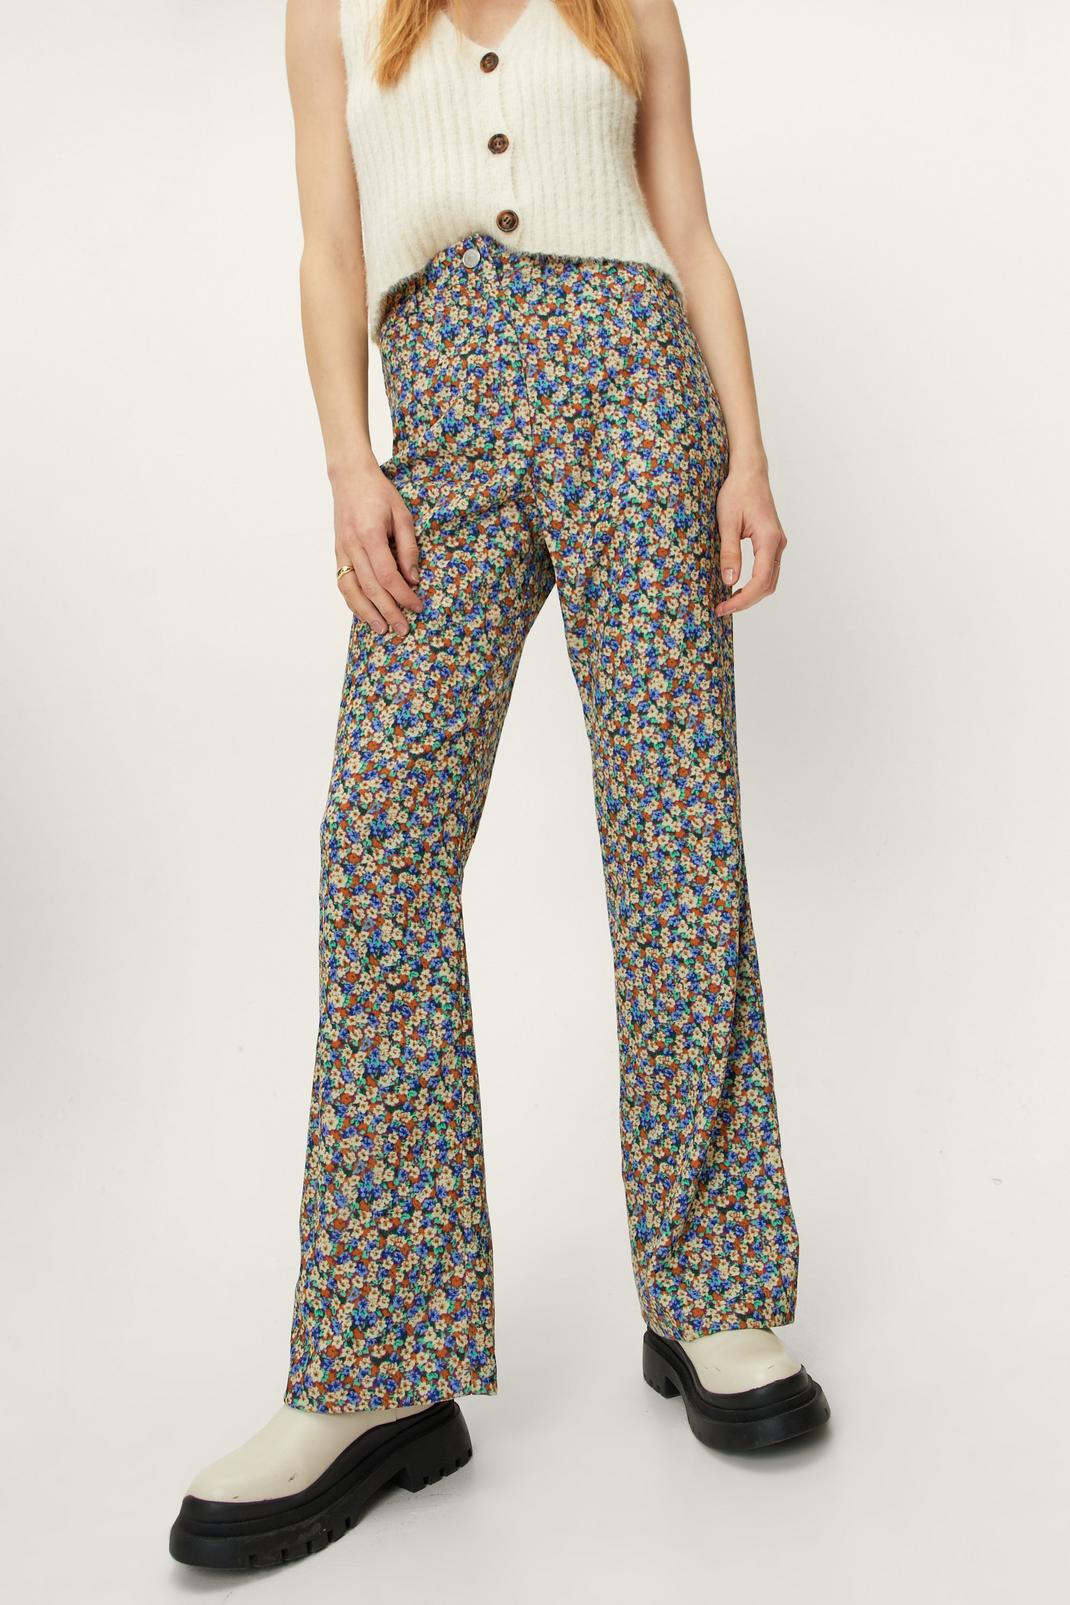 Rose Twill High Waisted Floral Print Flared Trousers image number 1